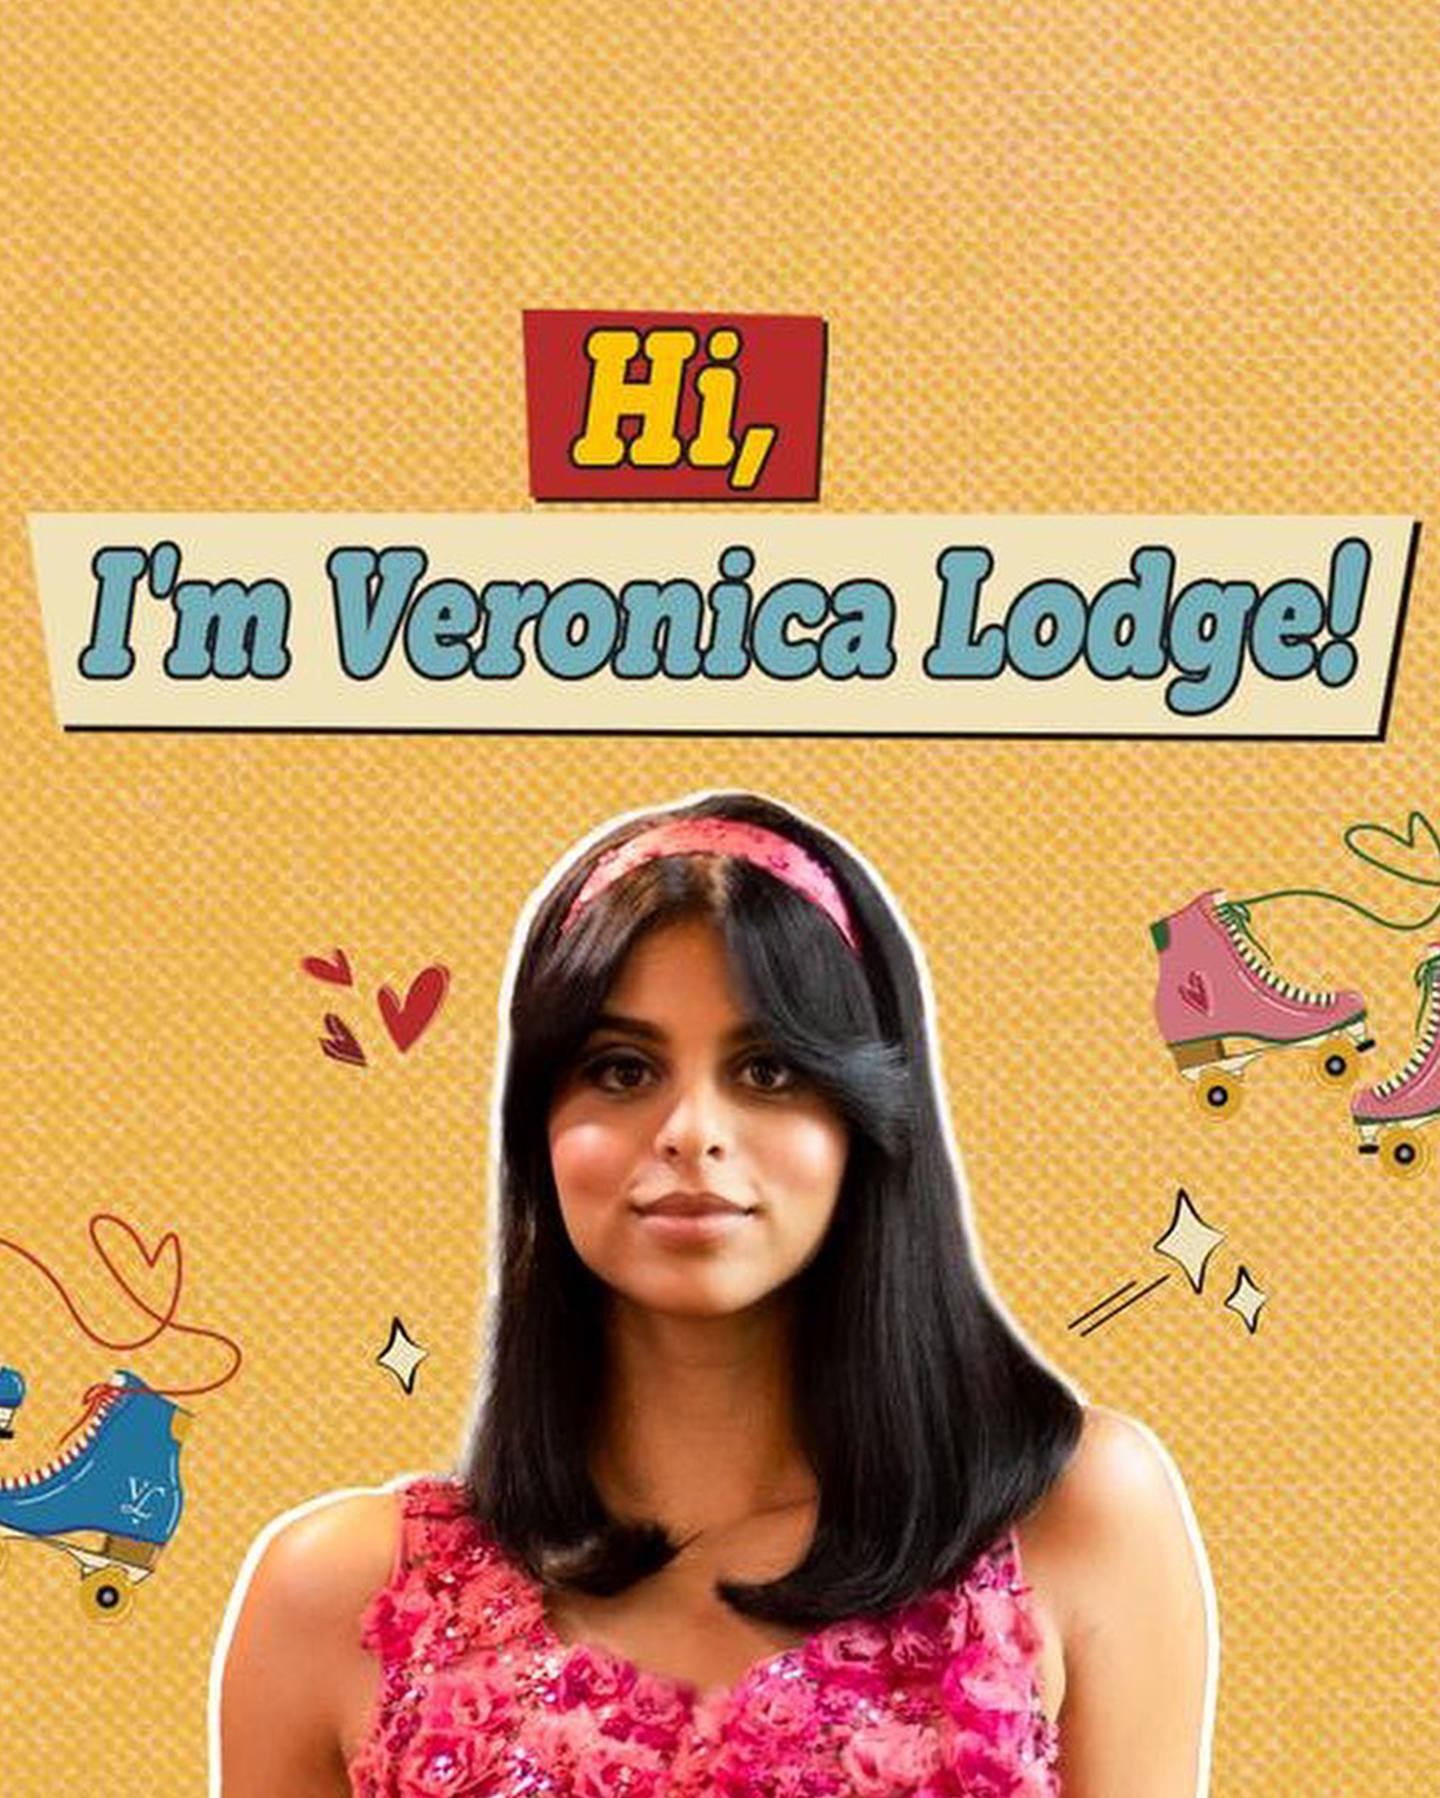 Suhana Khan as Veronica Lodge in The Archies